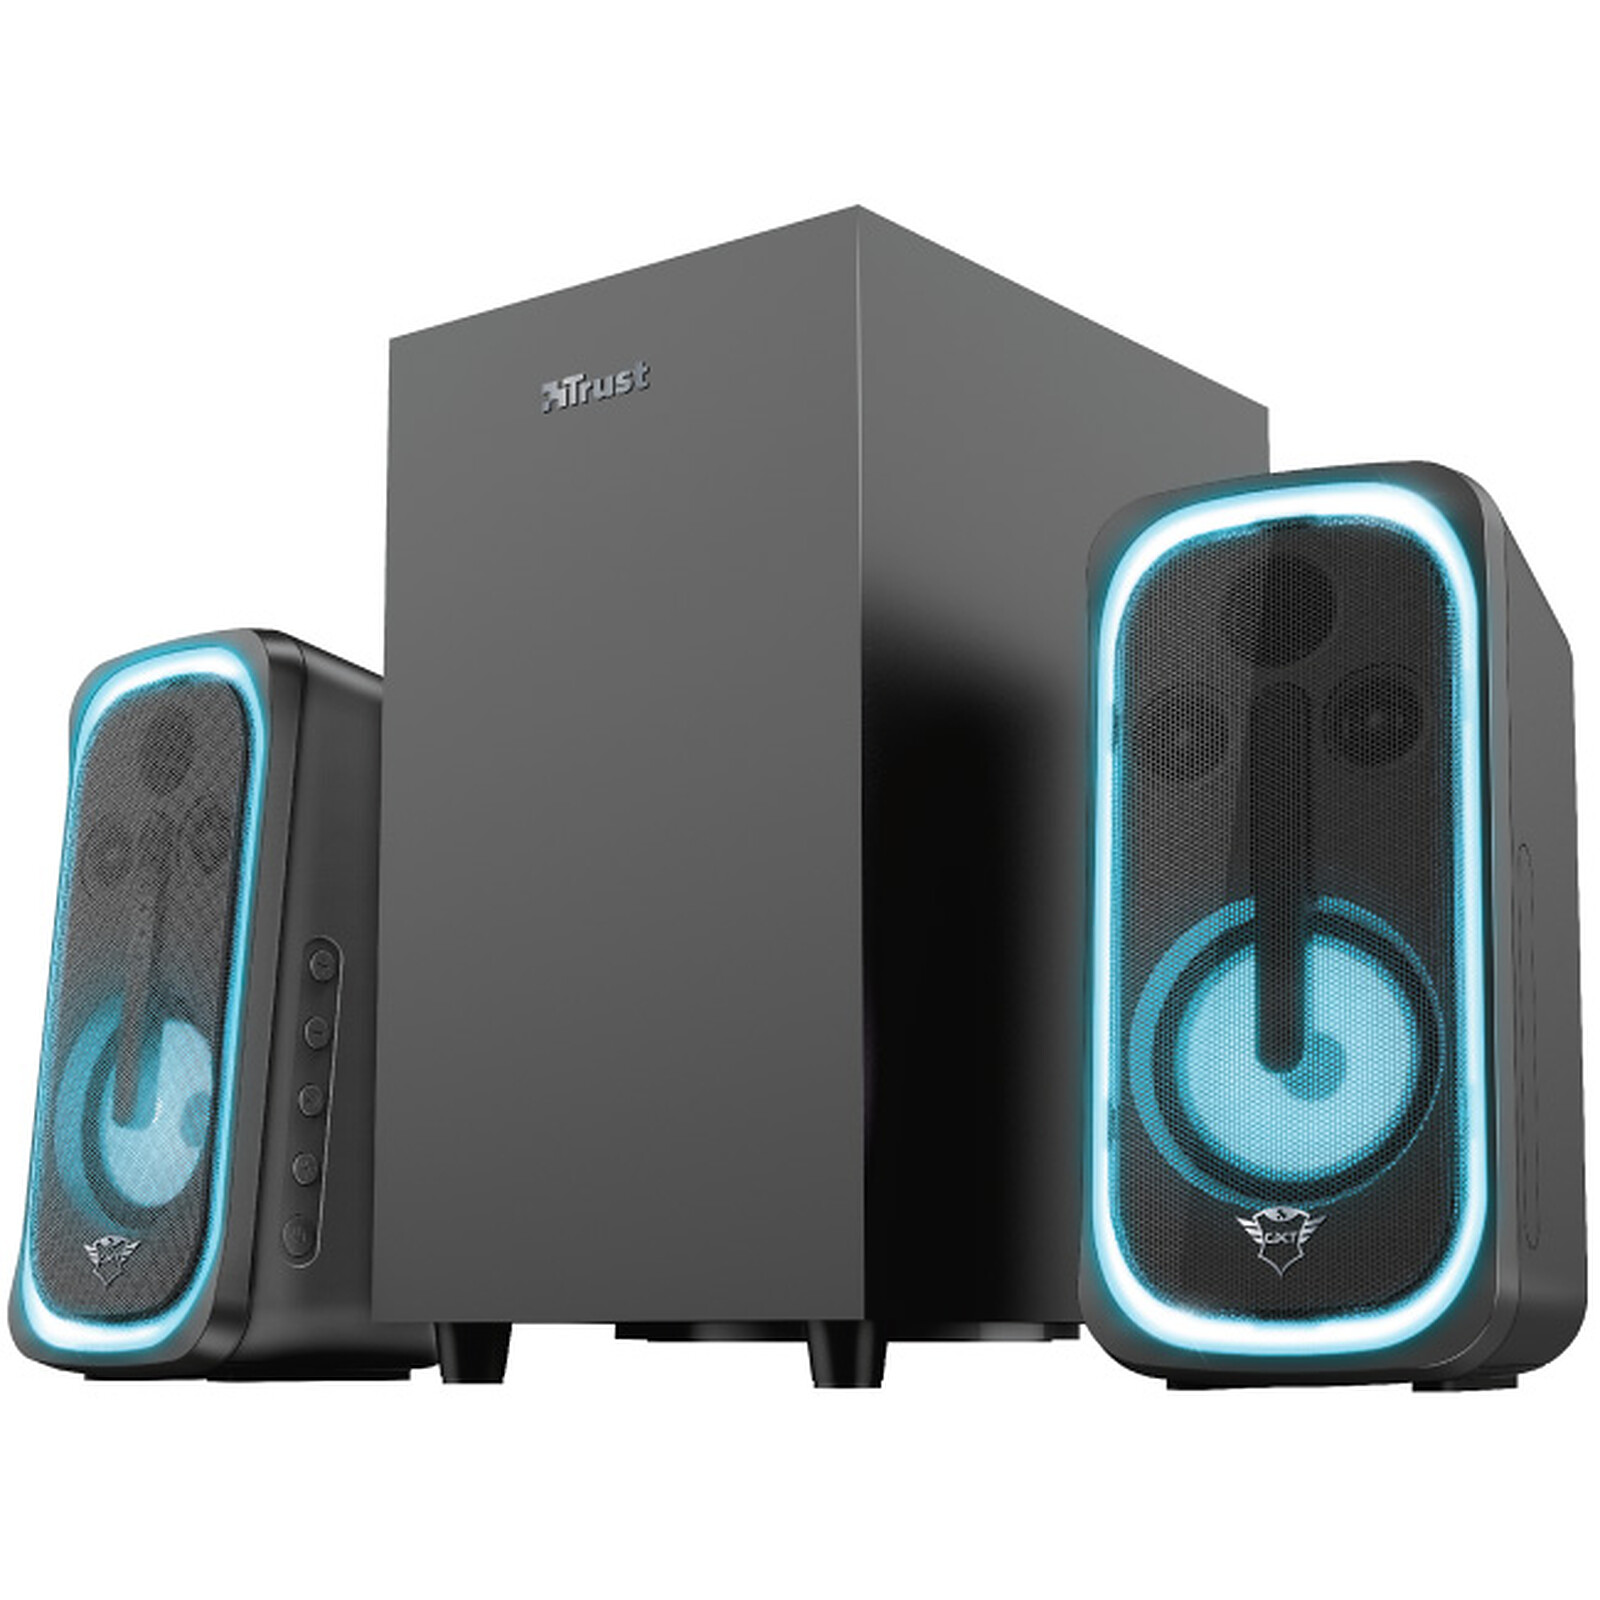 HECATE G5000 - Altavoces PC - LDLC